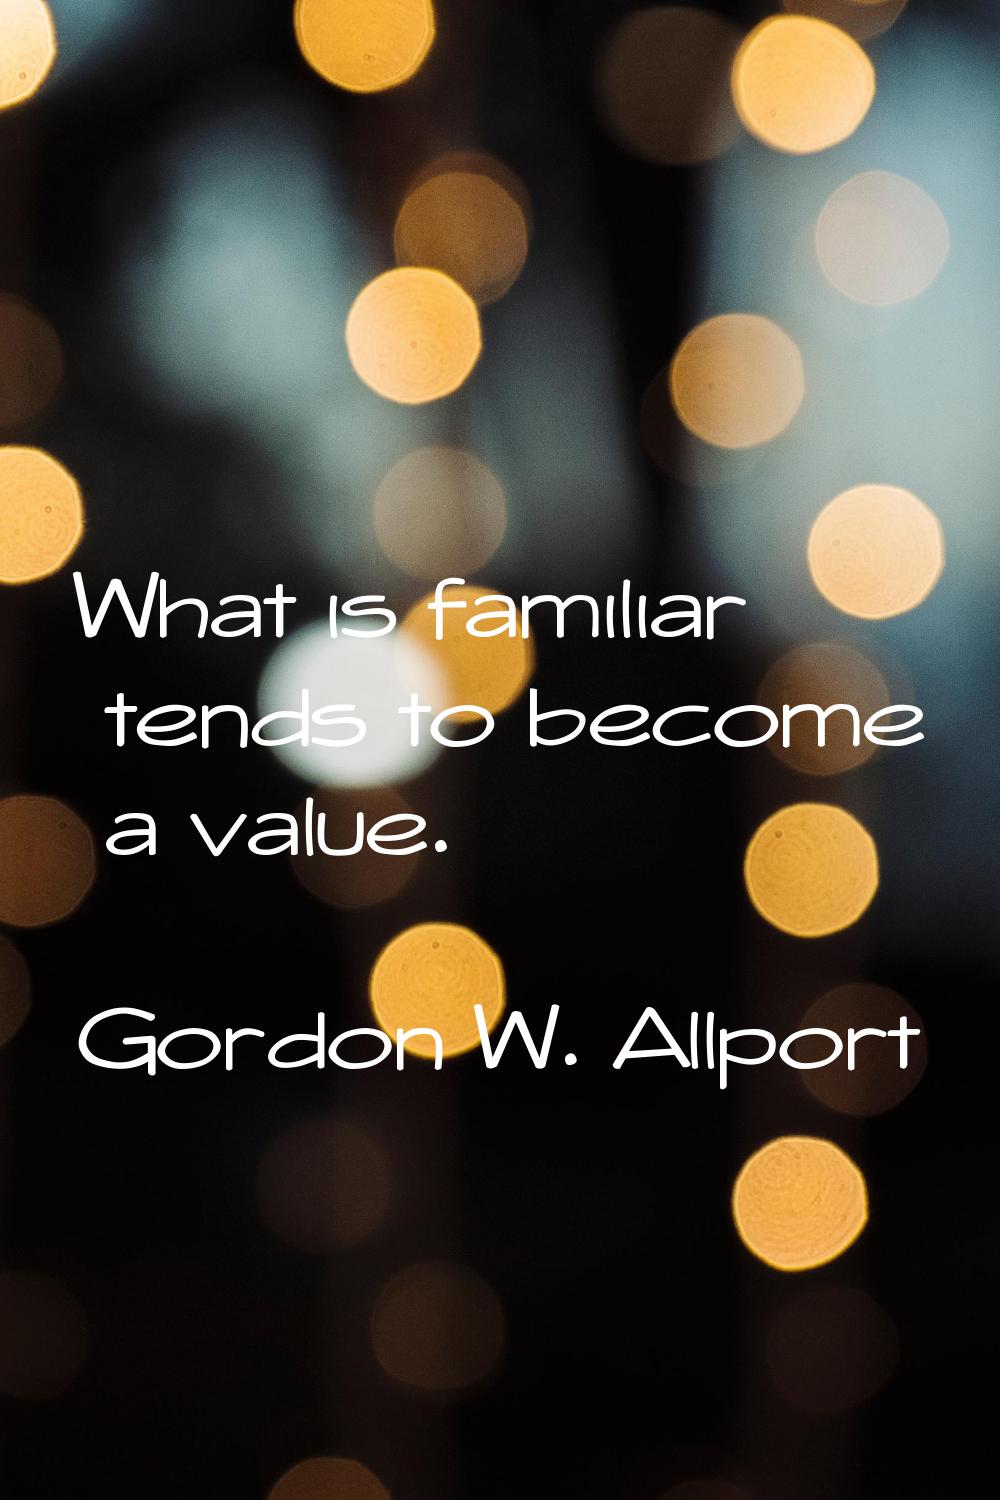 What is familiar tends to become a value.